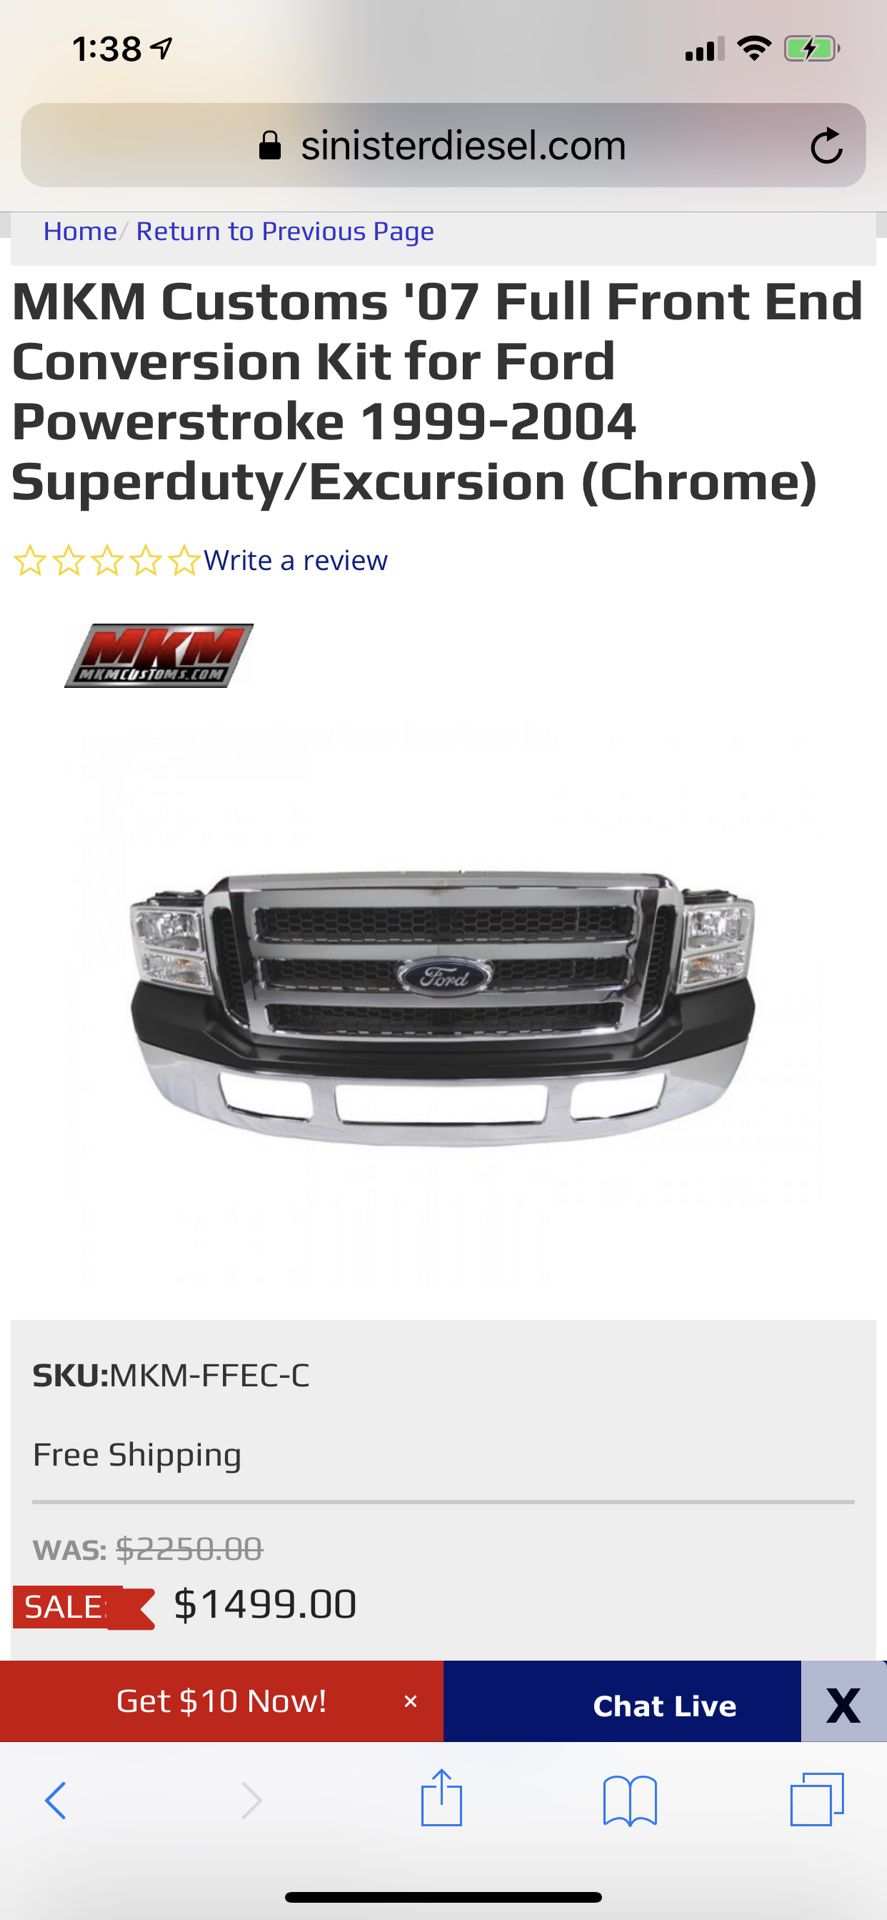 2007 super duty front end to 99-04